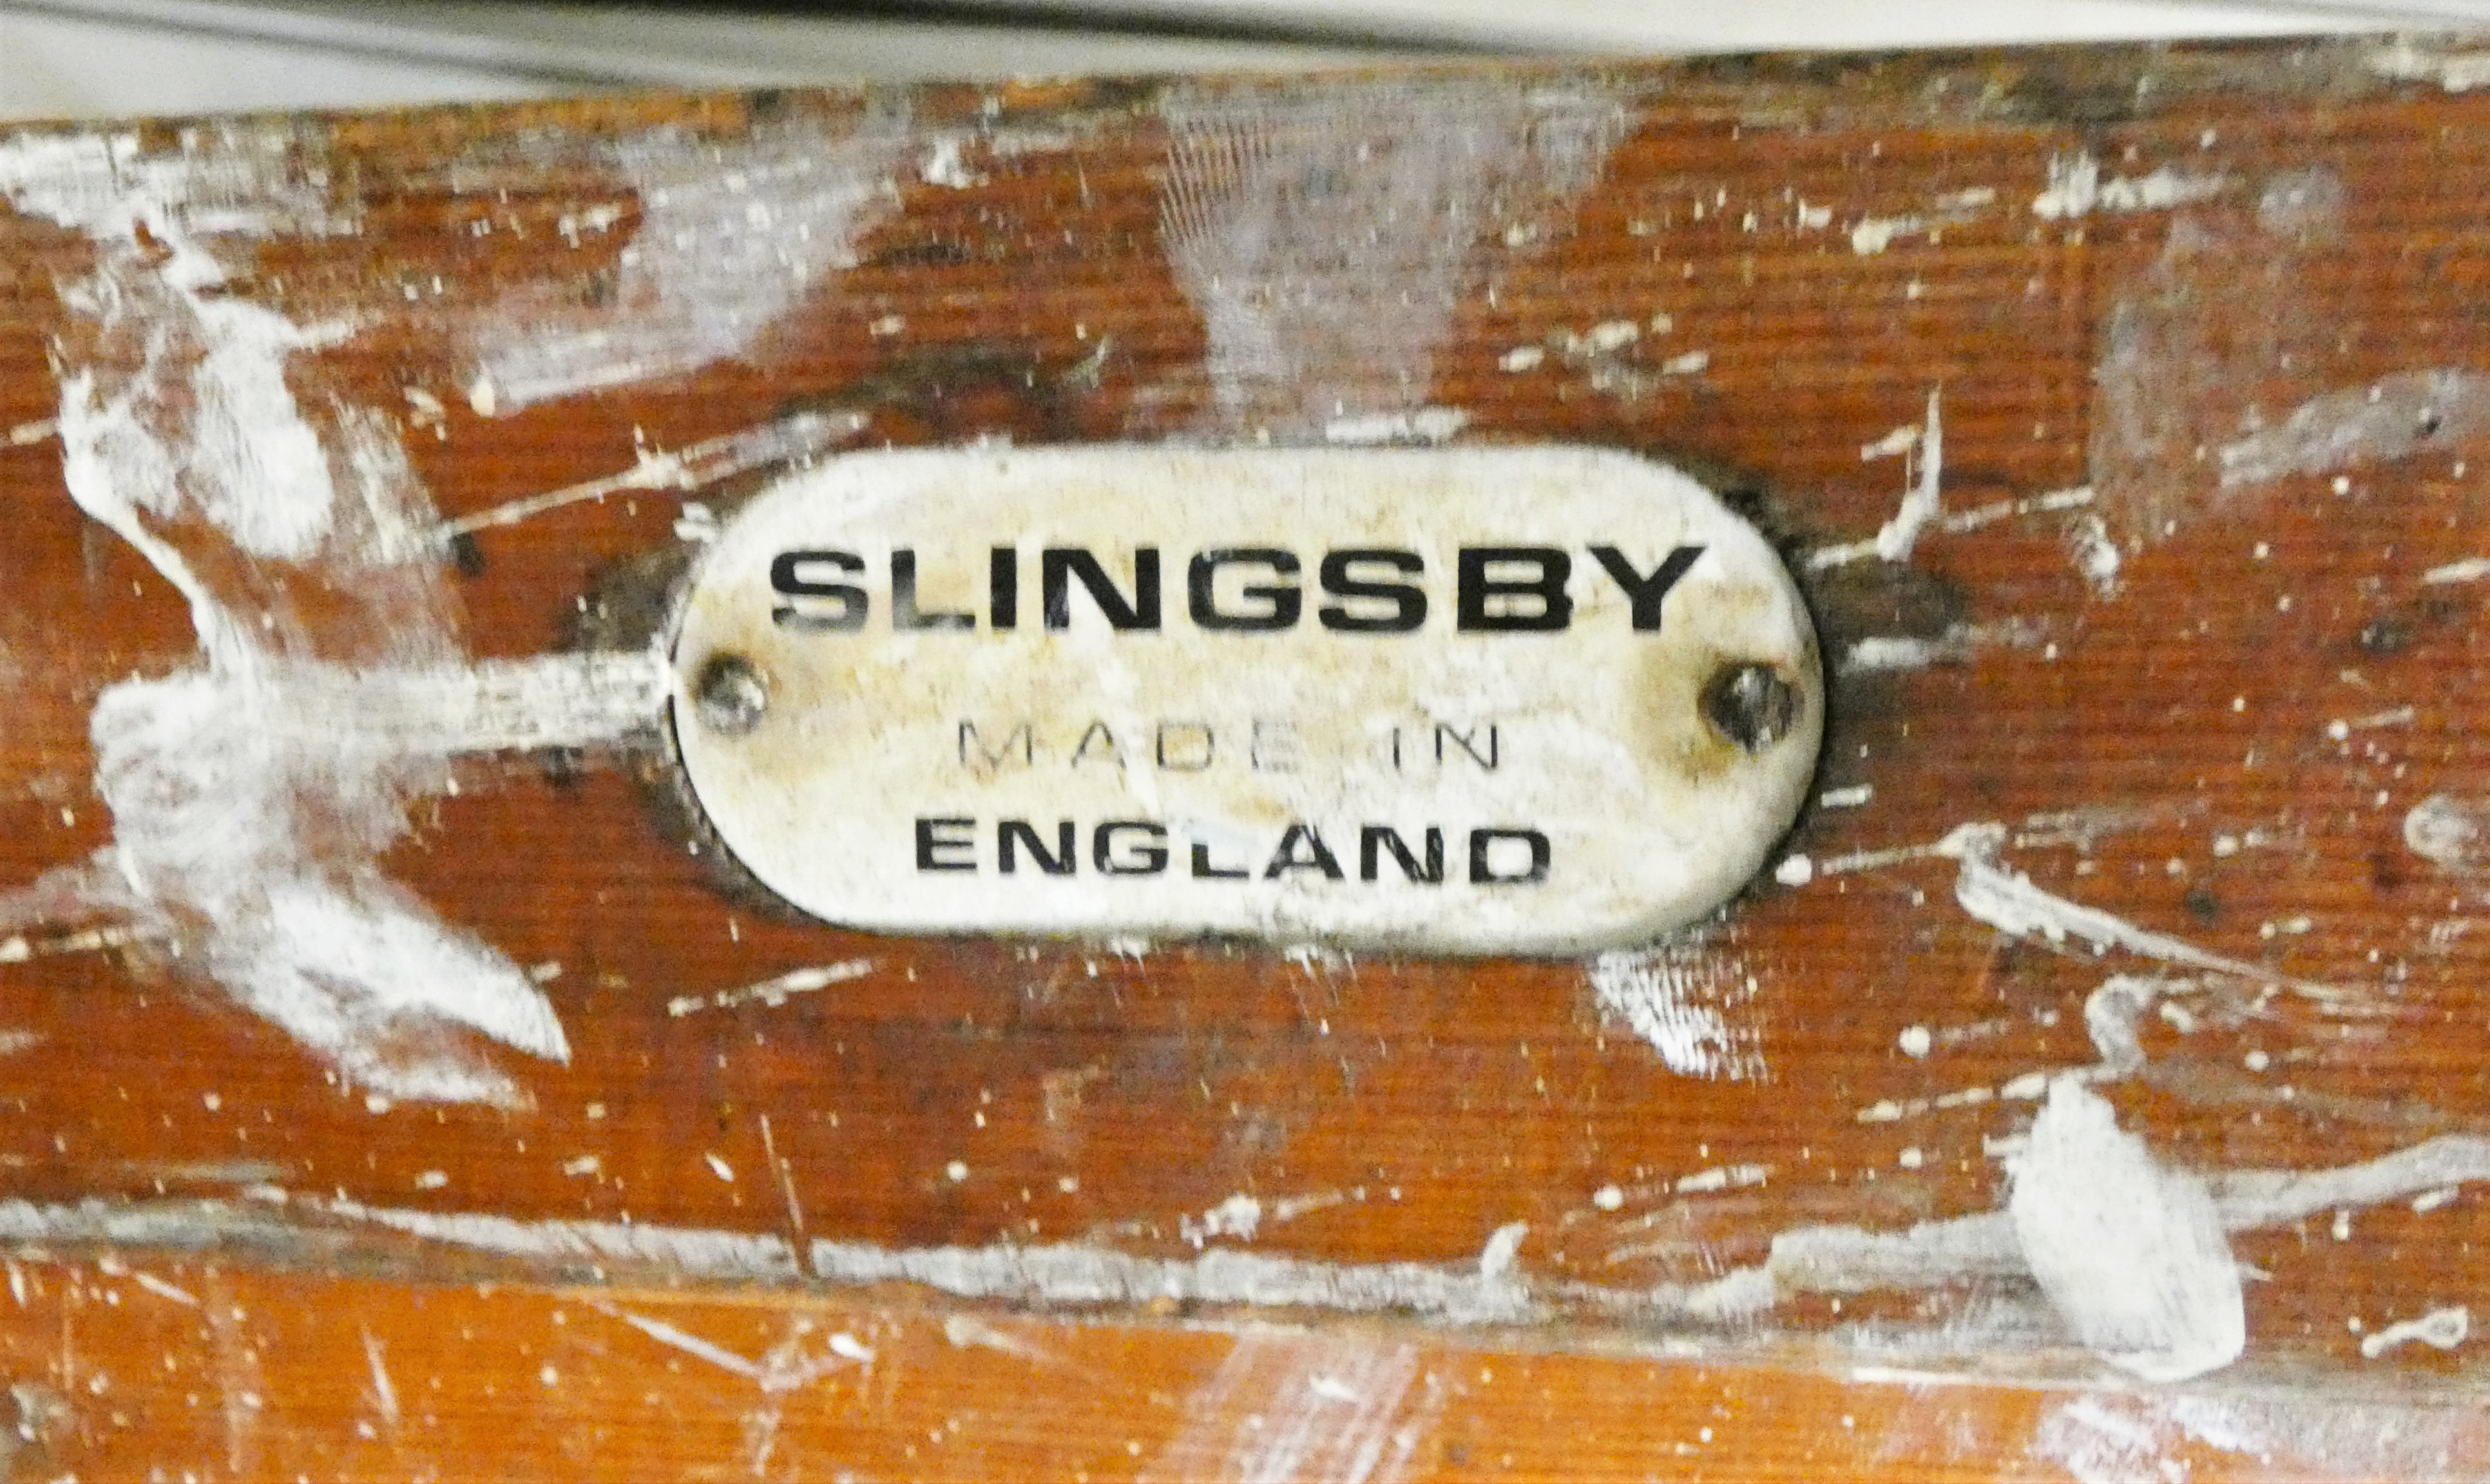 A ten foot painters ladder by Slingsby, marked 'AM43'. Please note this is sold as a decorative item - Image 2 of 2